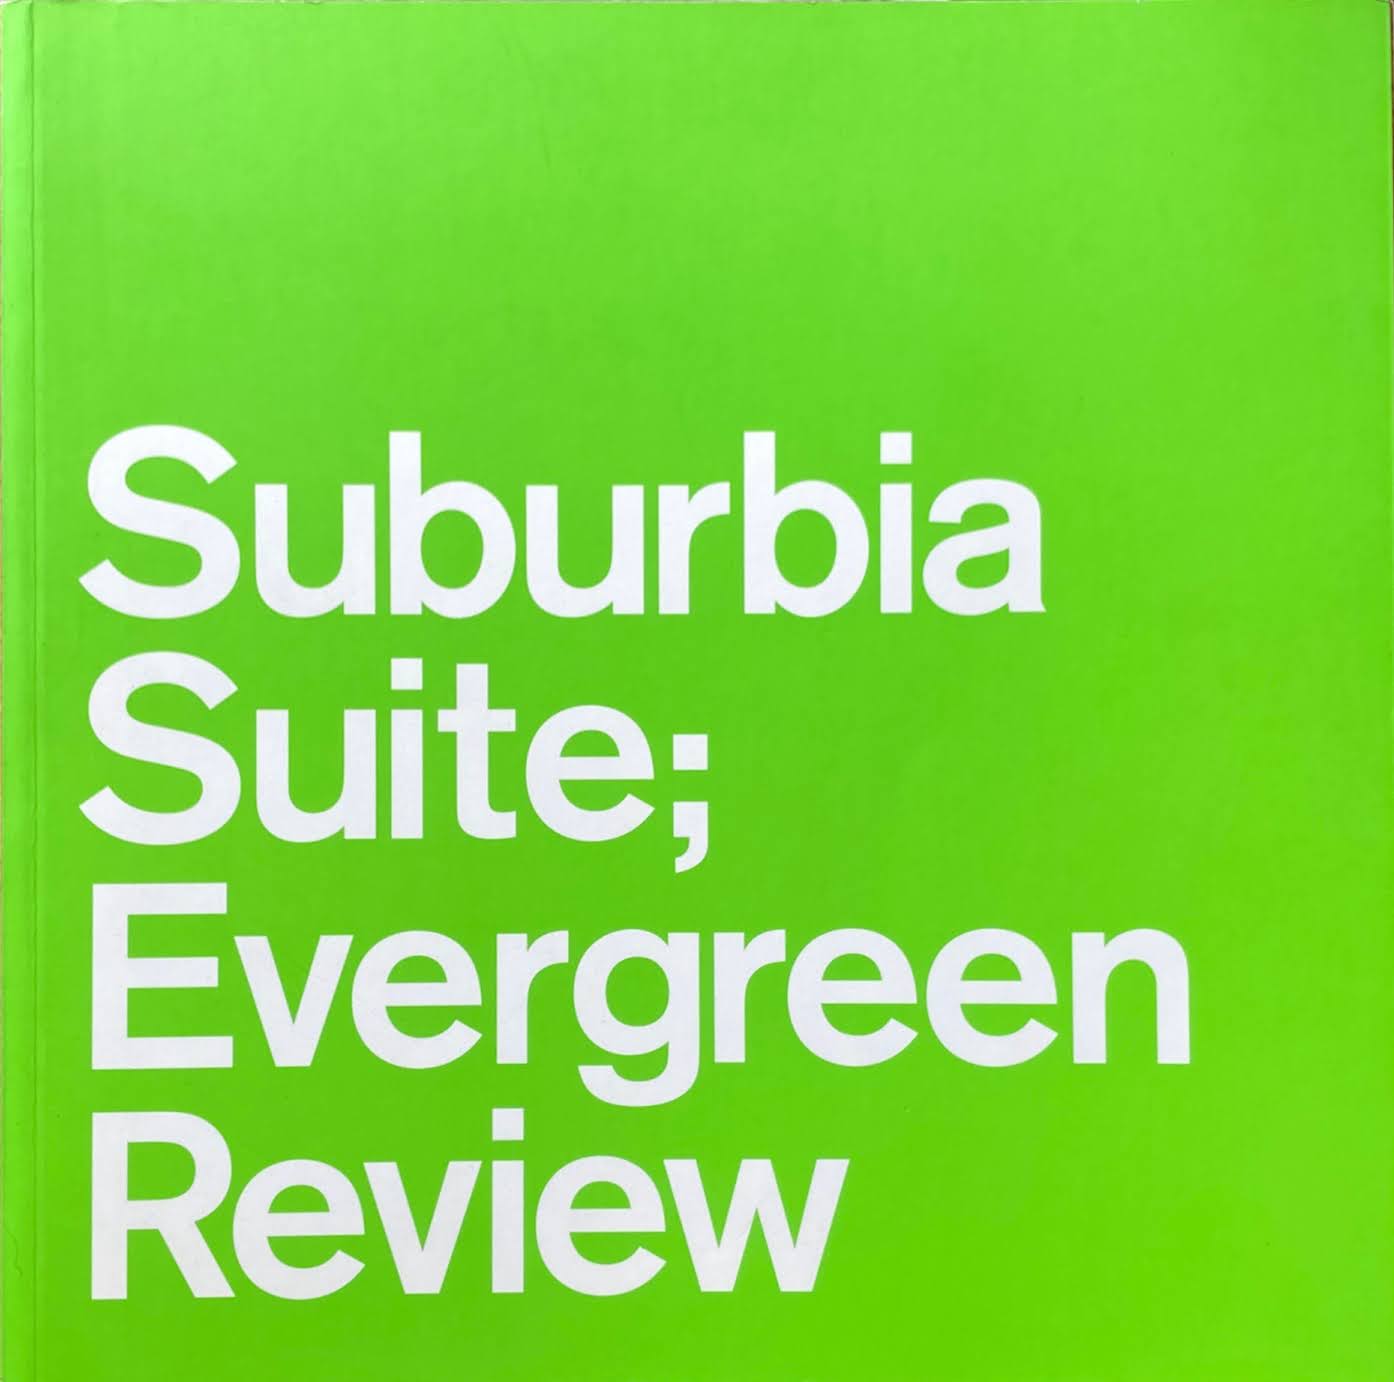 Suburbia Suite；Evergreen Review